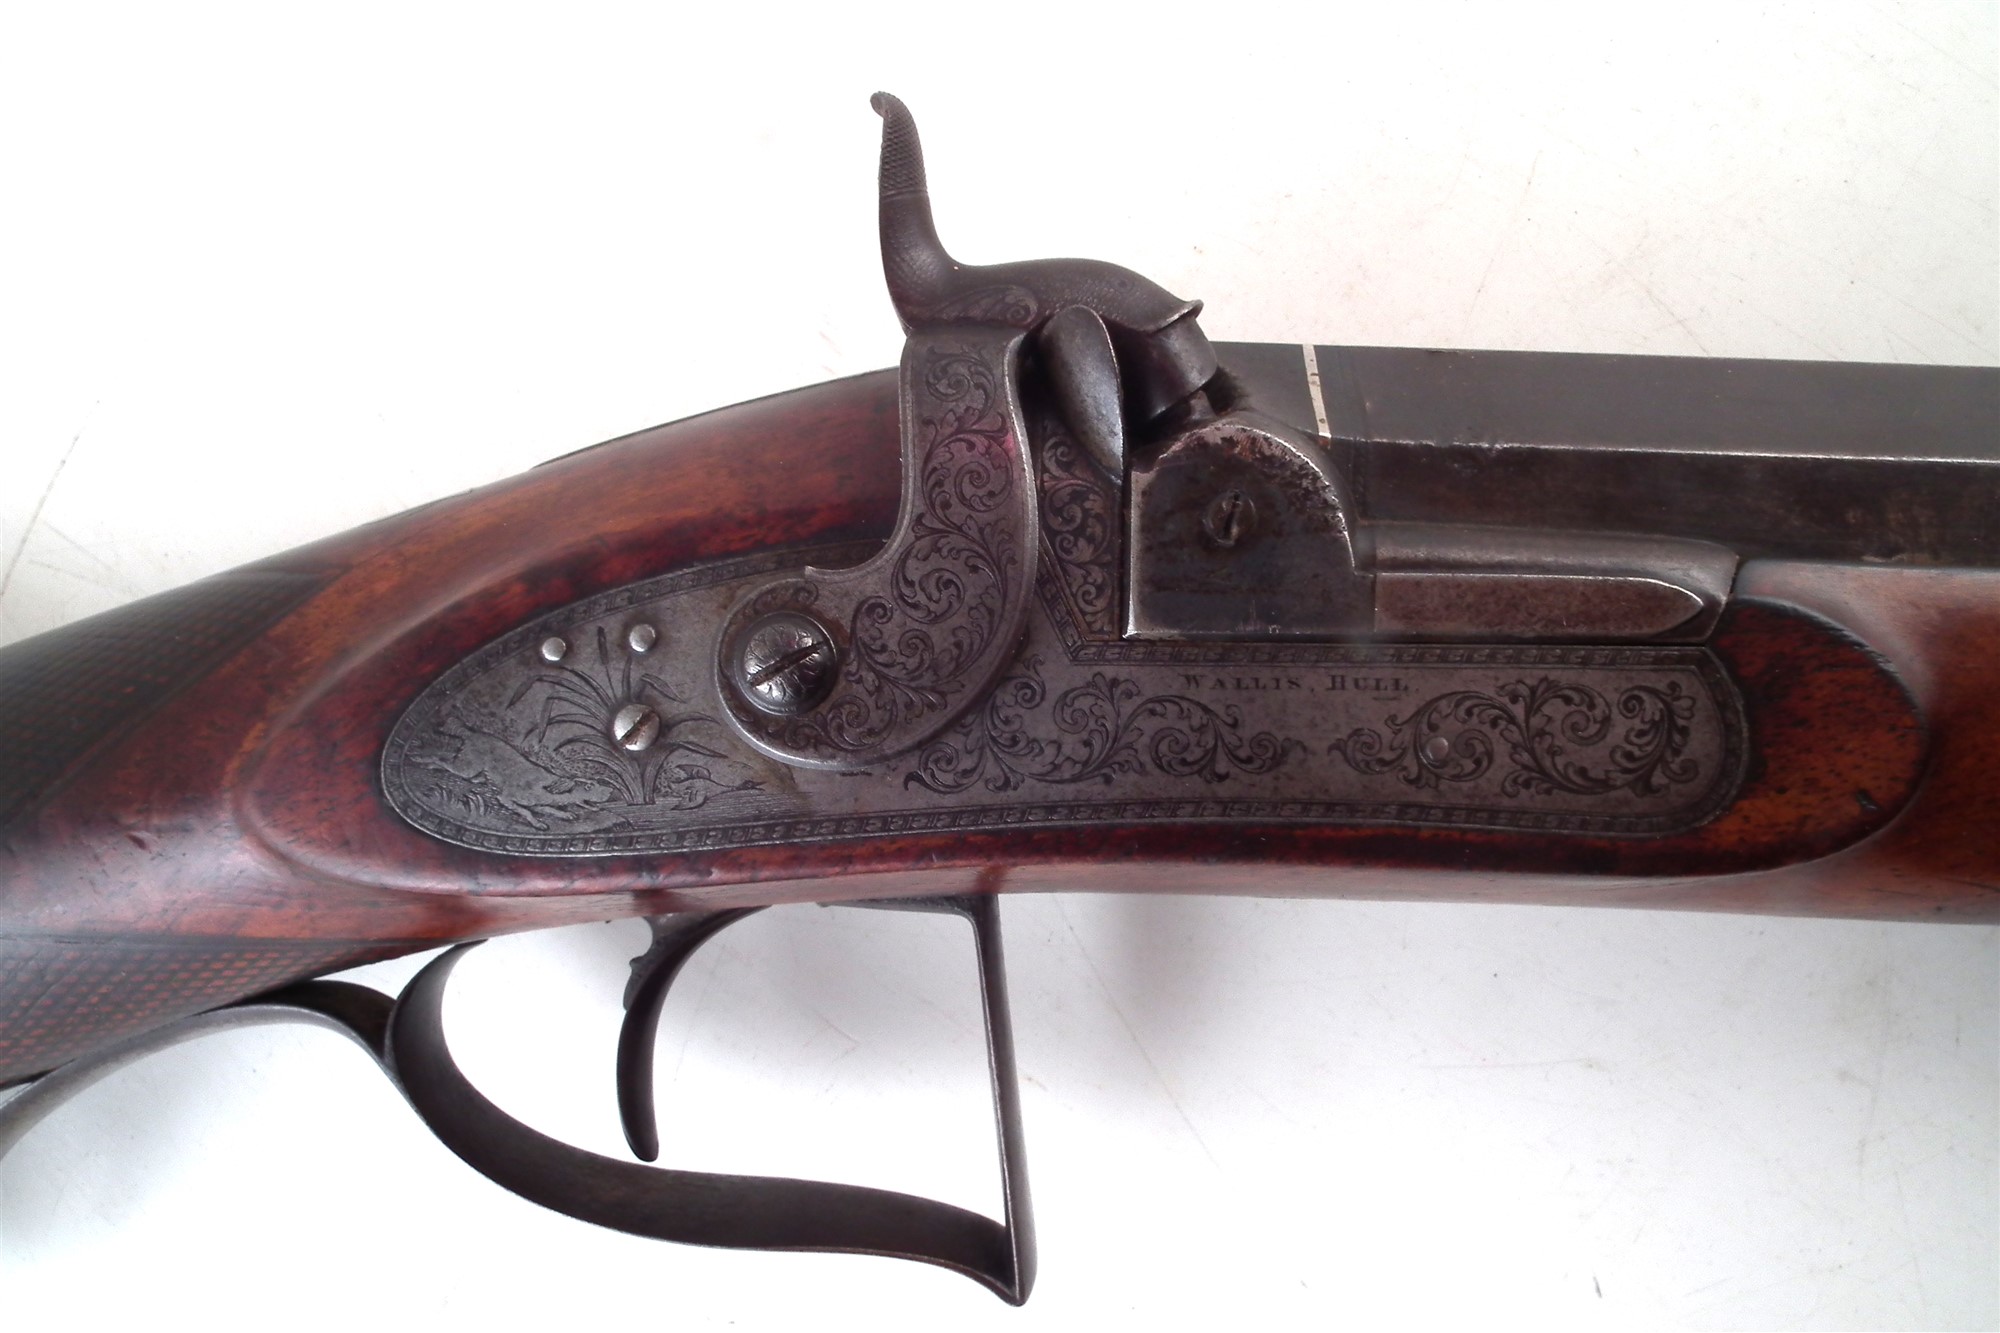 Wallis of Hull 6 bore percussion sporting gun, with Spanish form barrel engraved with Myton Gate - Image 4 of 12